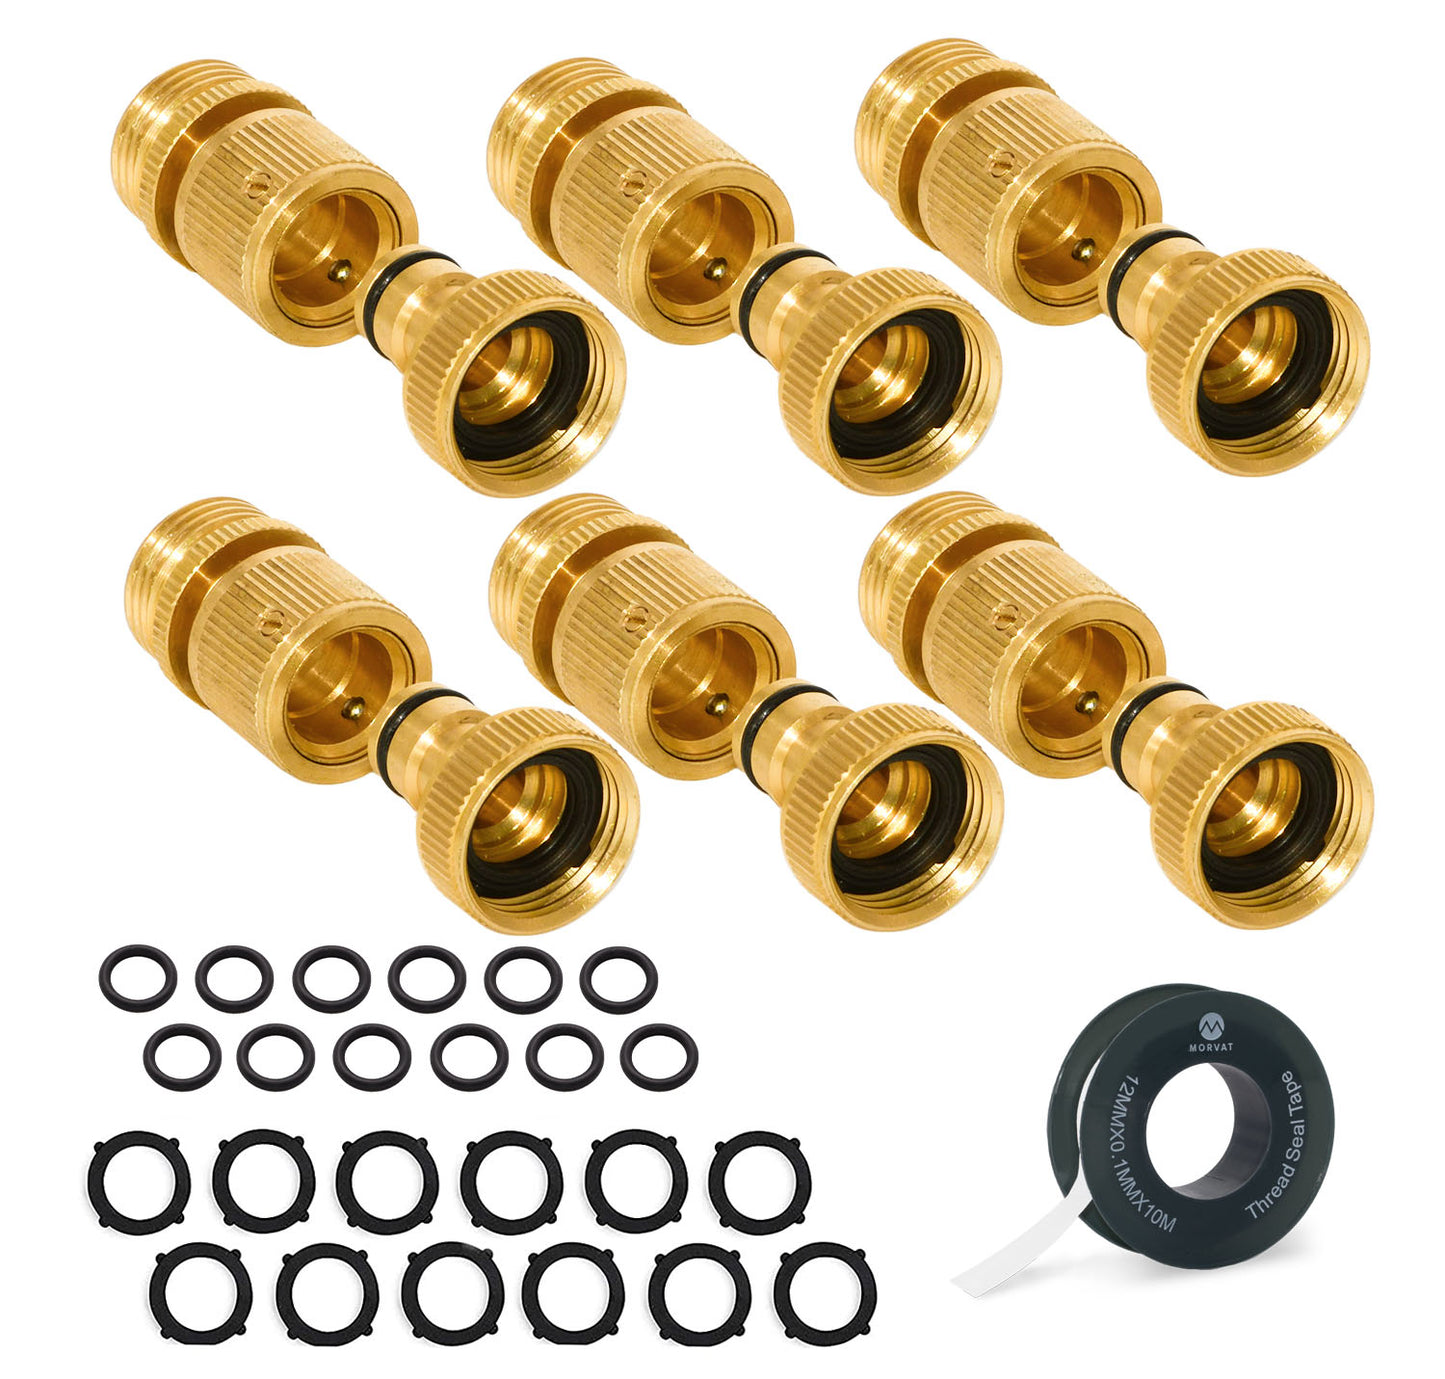 Brass Quick Connect Garden Hose Fittings for Source & Accessory Connections